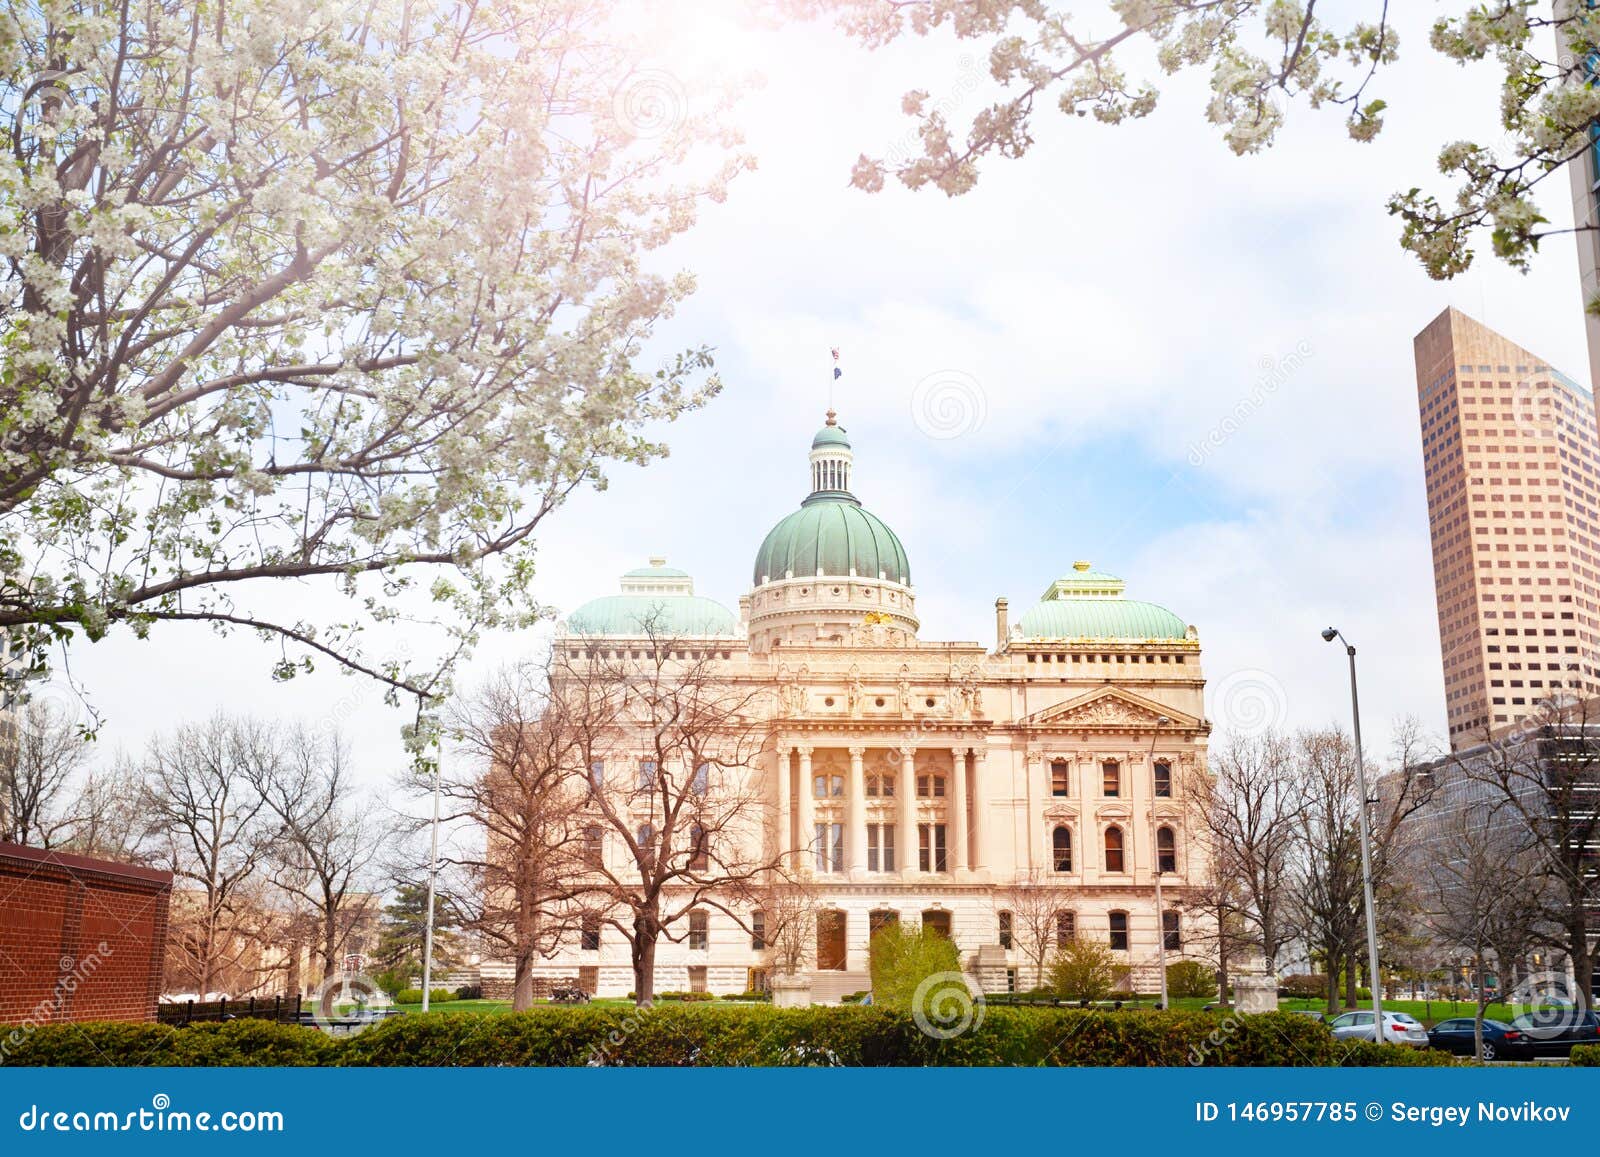 indiana statehouse in spring, indianapolis, usa